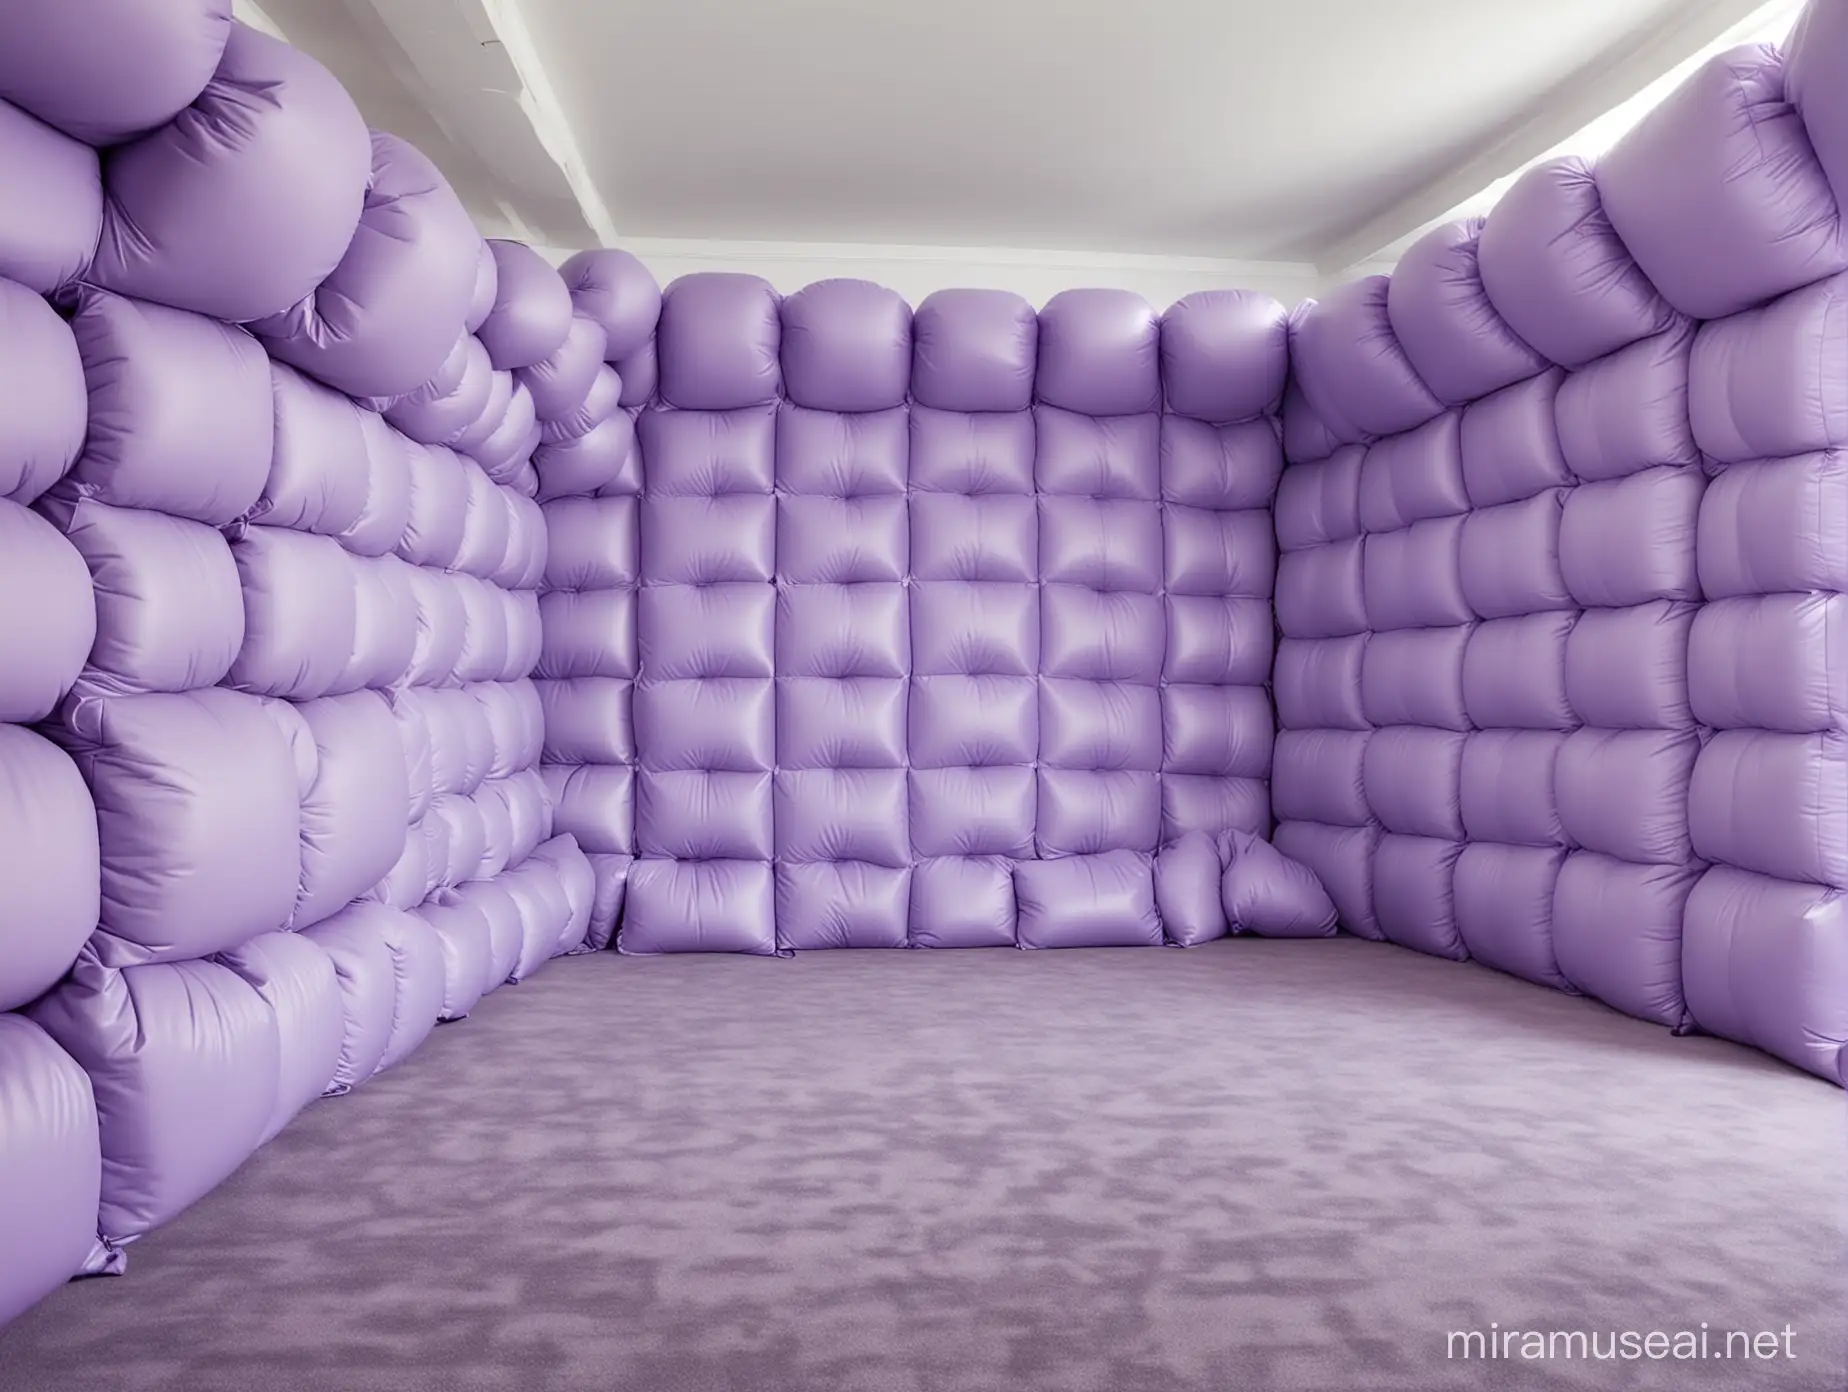 Spacious PopUp Room with Puffy Blue Walls and Purple Blobs Print